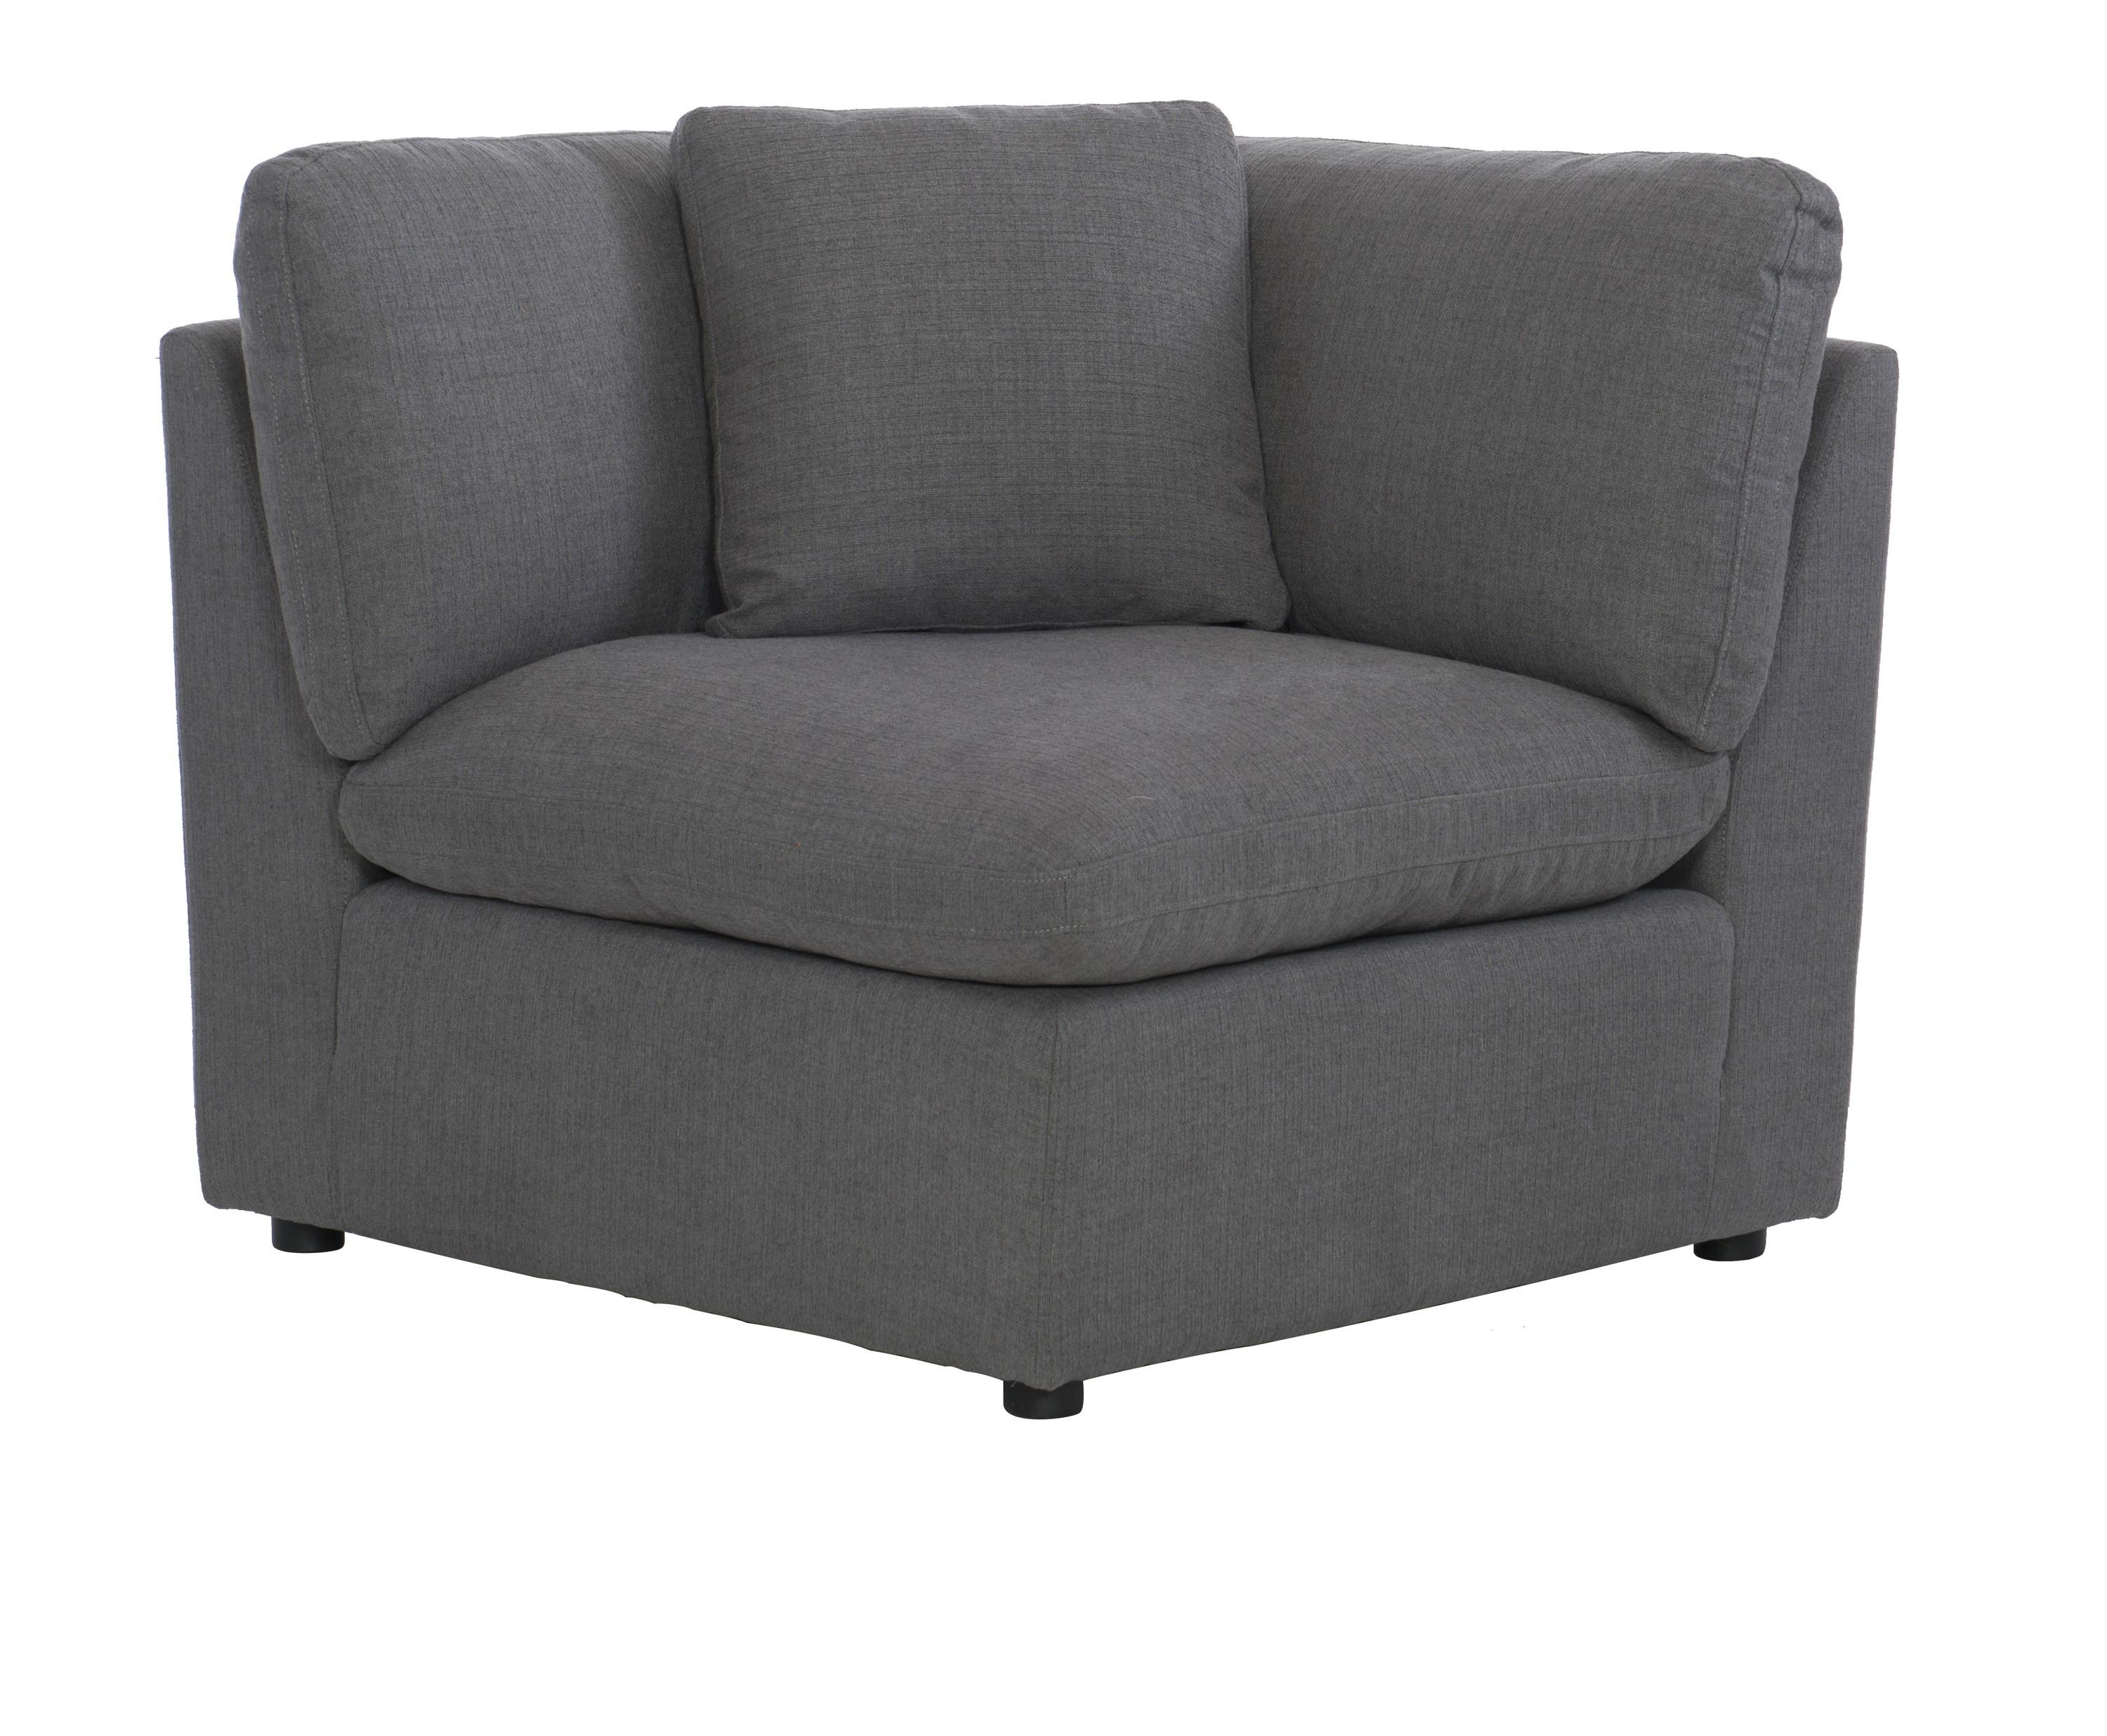 Modern Corner Seat 9544GY-CR Howerton 9544GY-CR in Gray Polyester